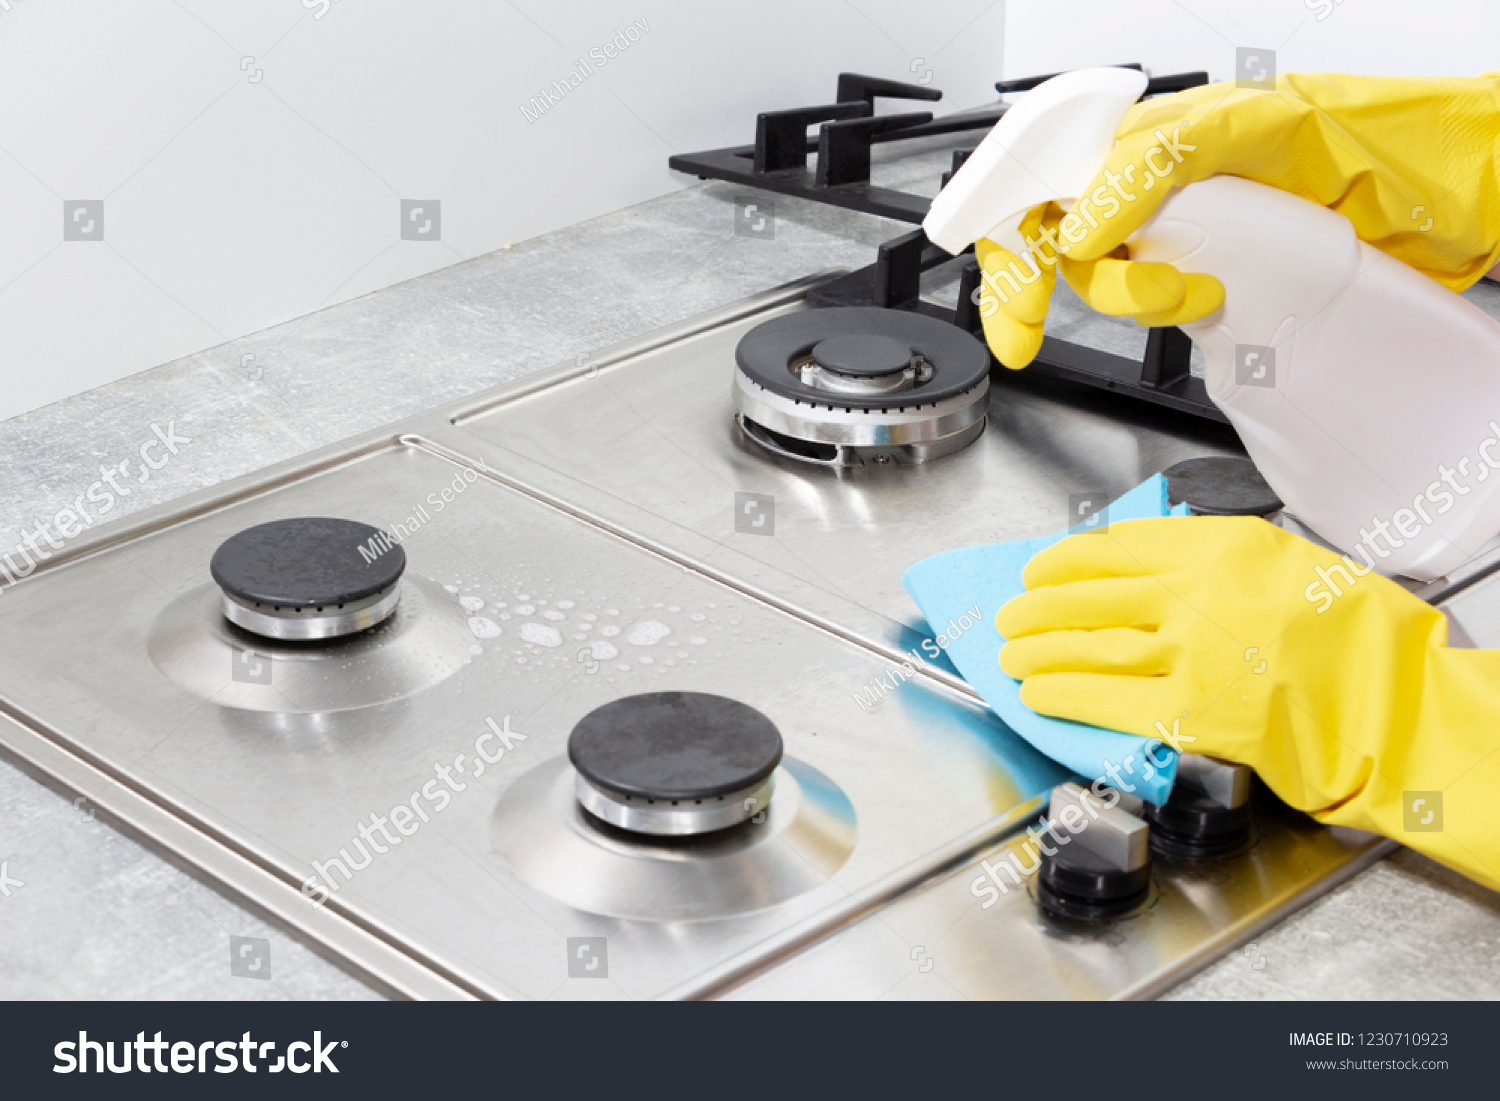 Stock Photo Cleaning A Gas Stove With Kitchen Utensils Household Concepts Or Hygiene And Cleaning 1230710923 